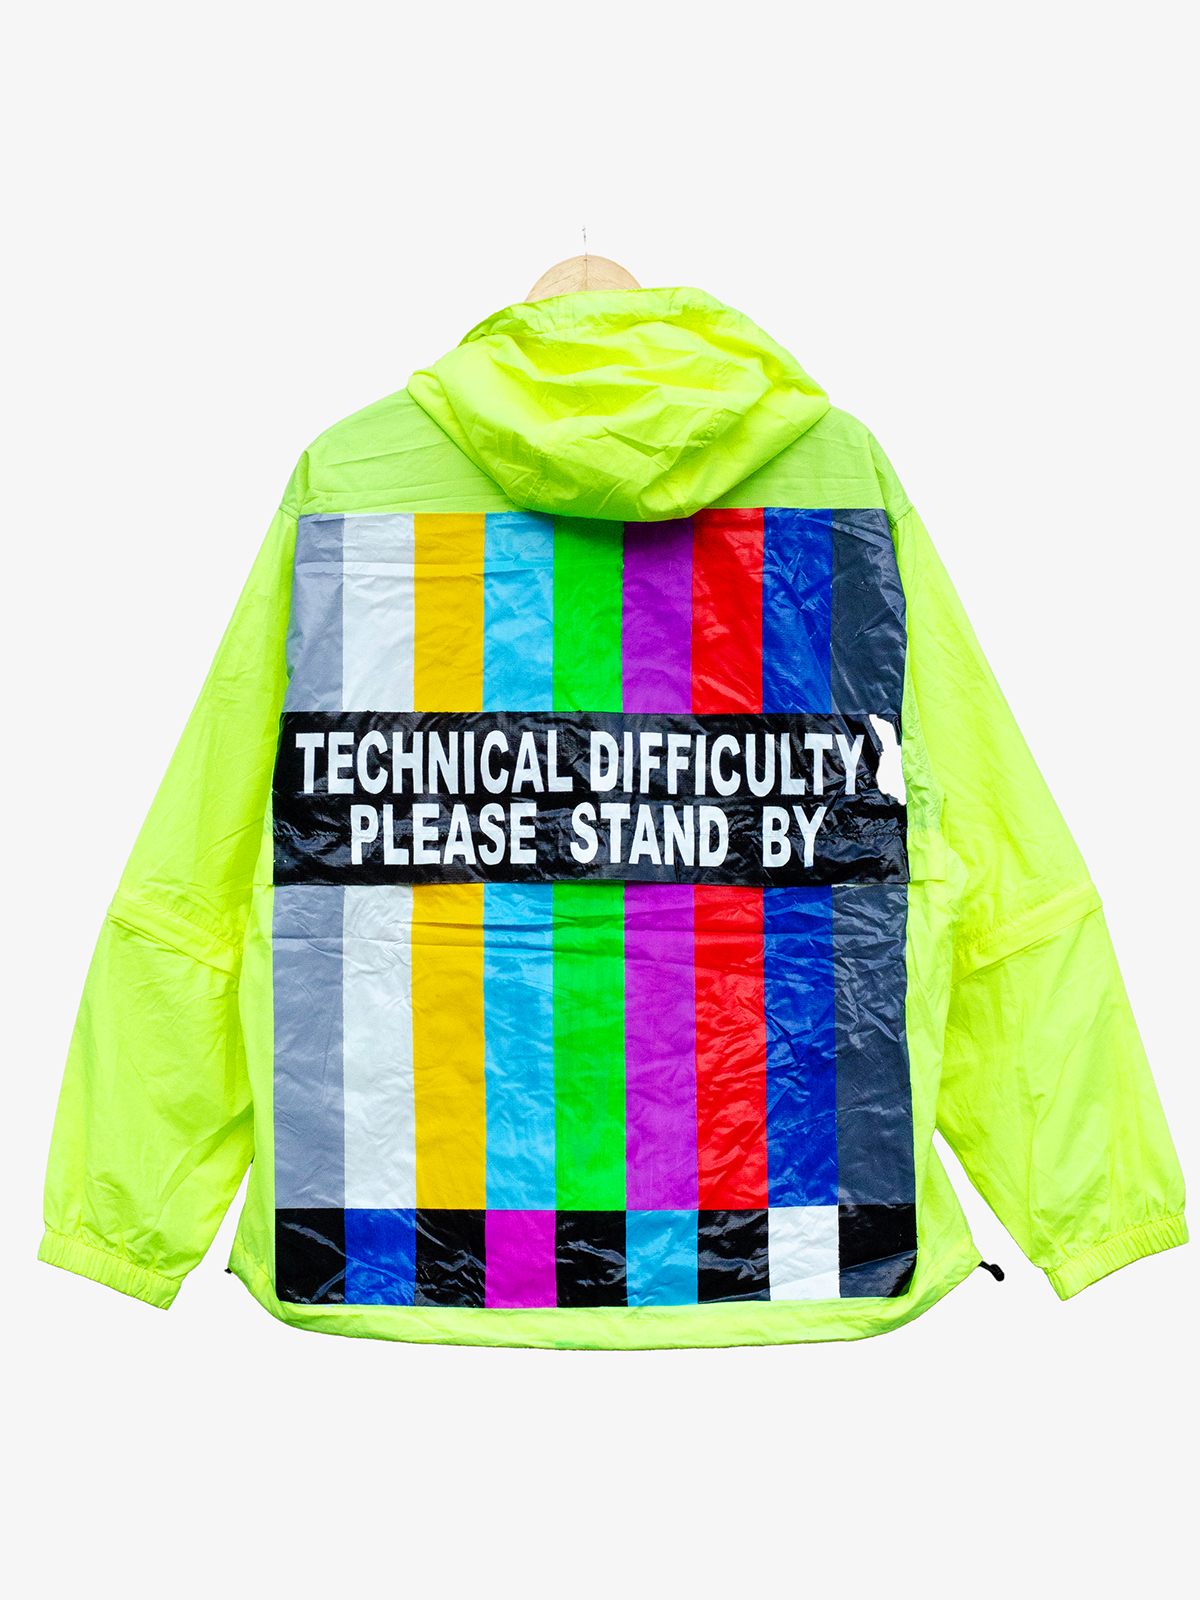 Technical Difficulty Please Stand By